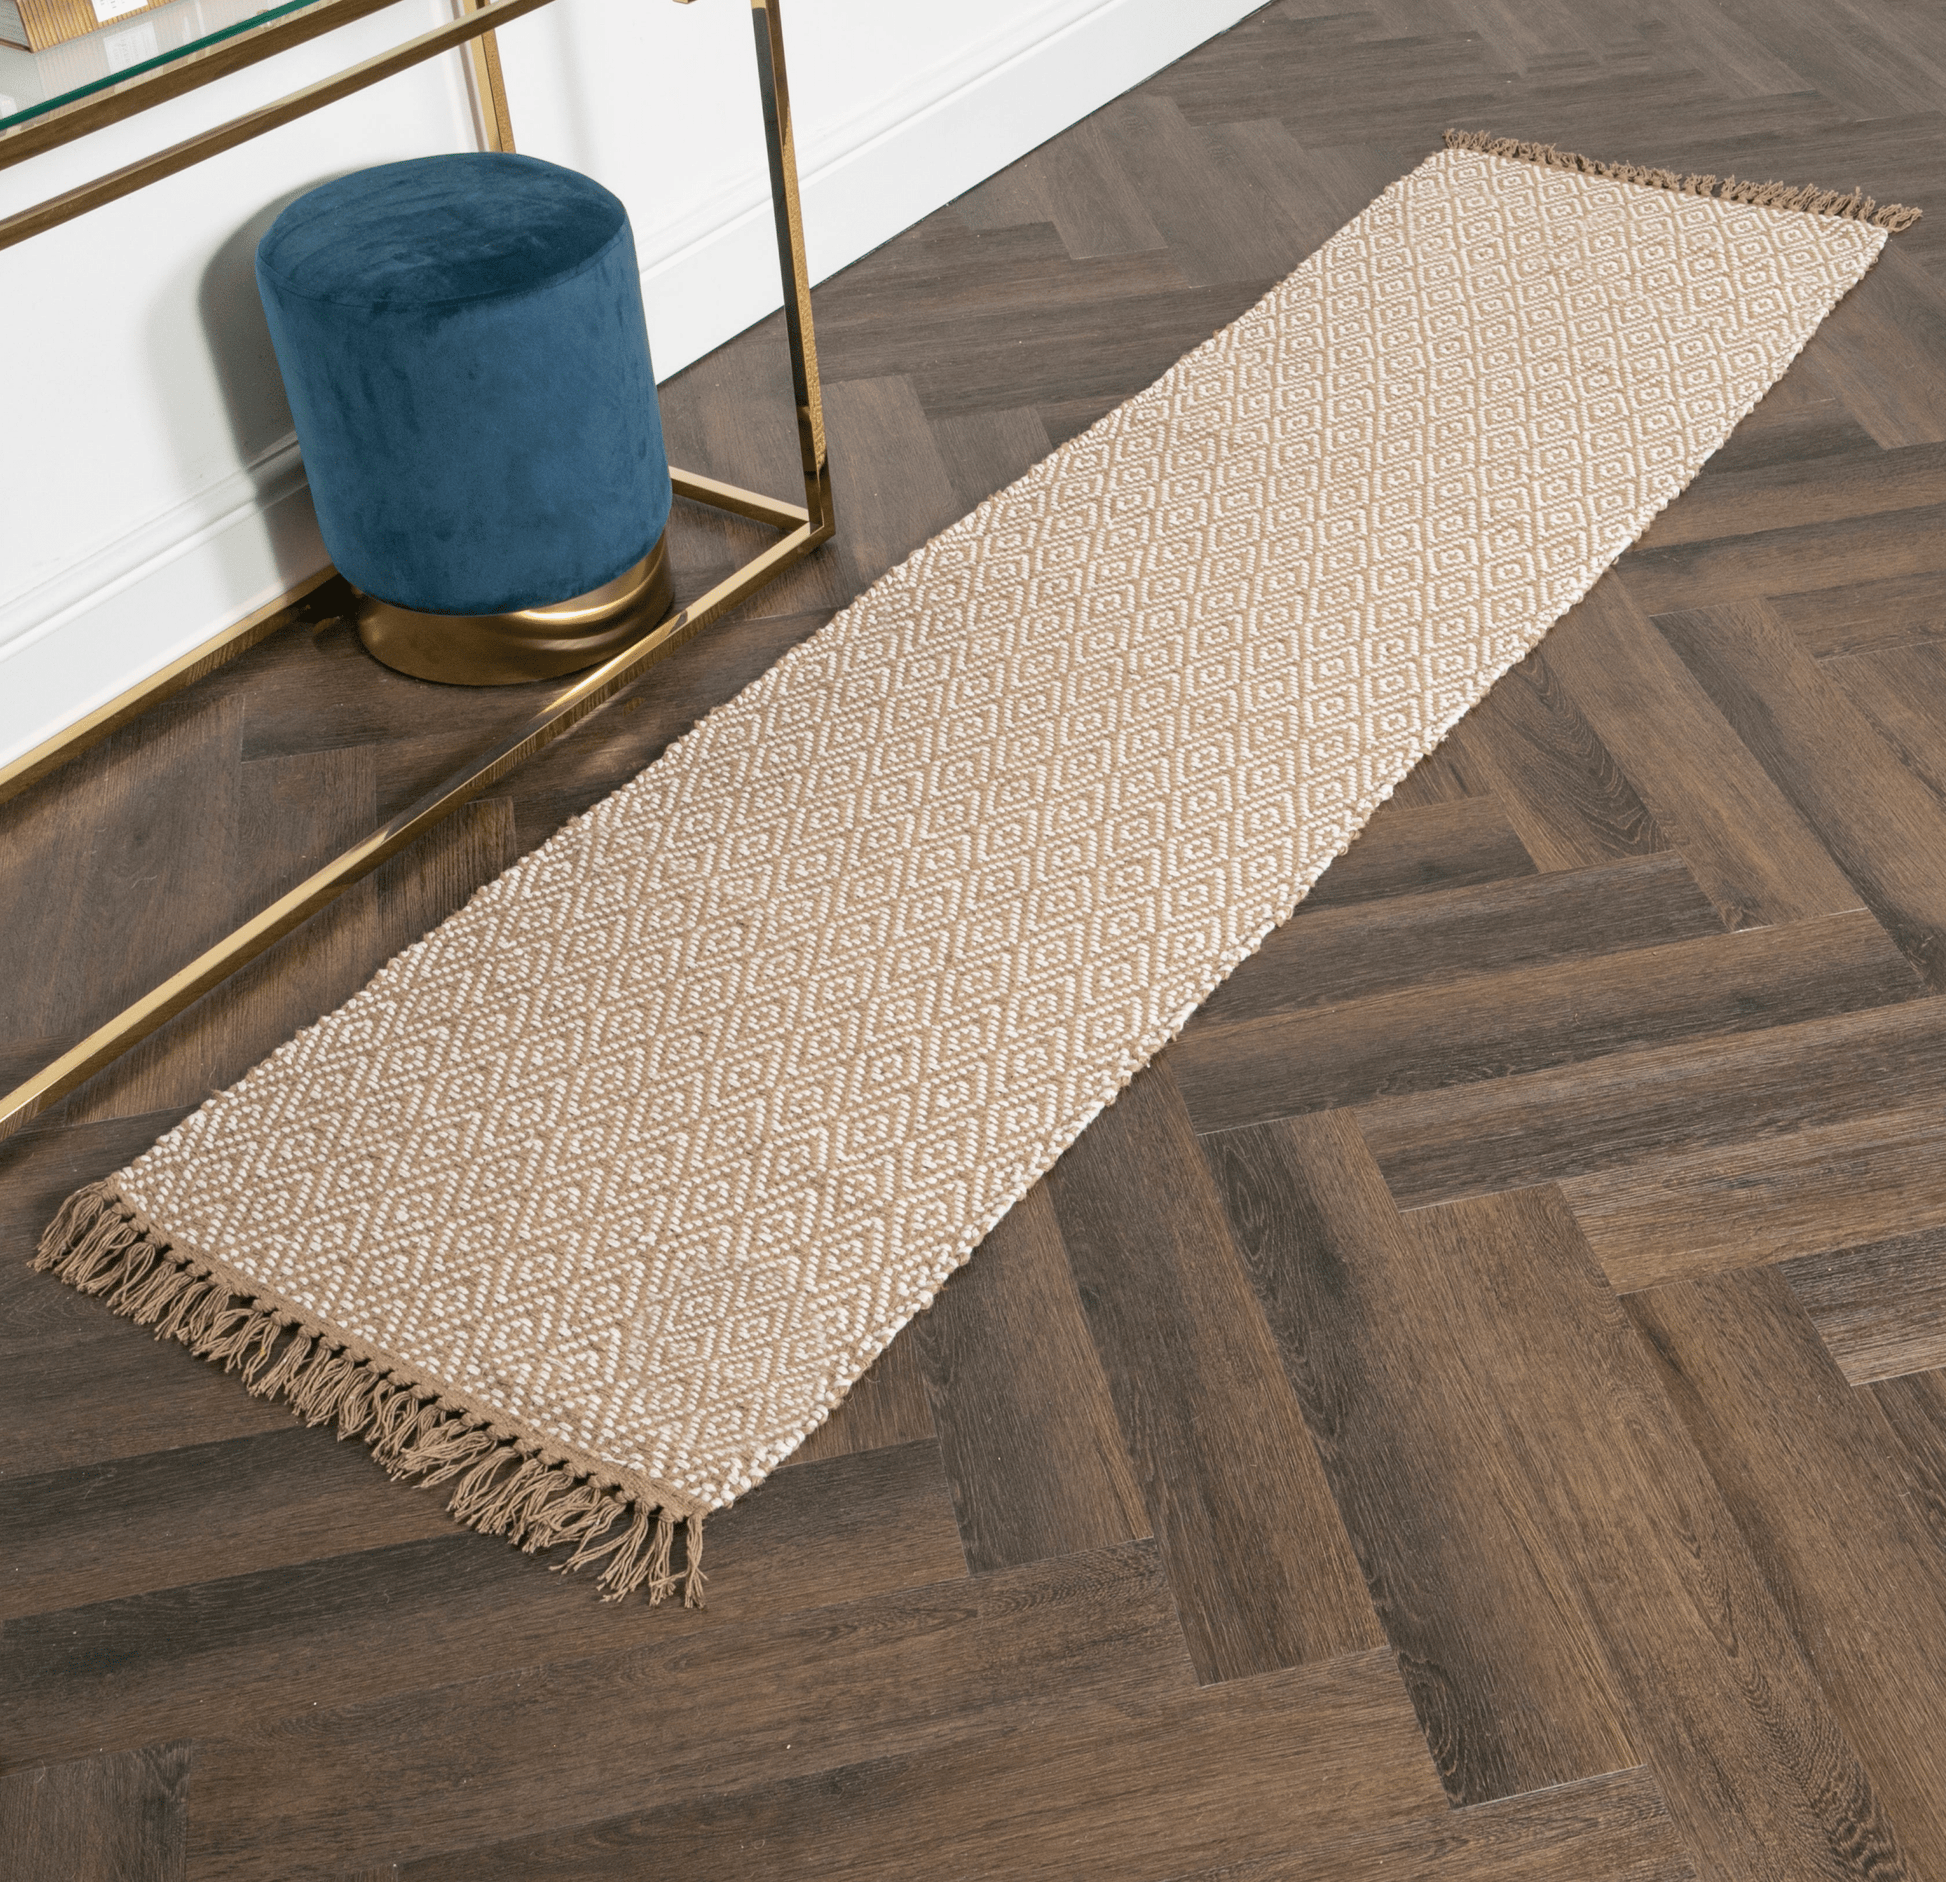 Jute Cotton Runner With Geometric Design by Native Home & Lifestyle